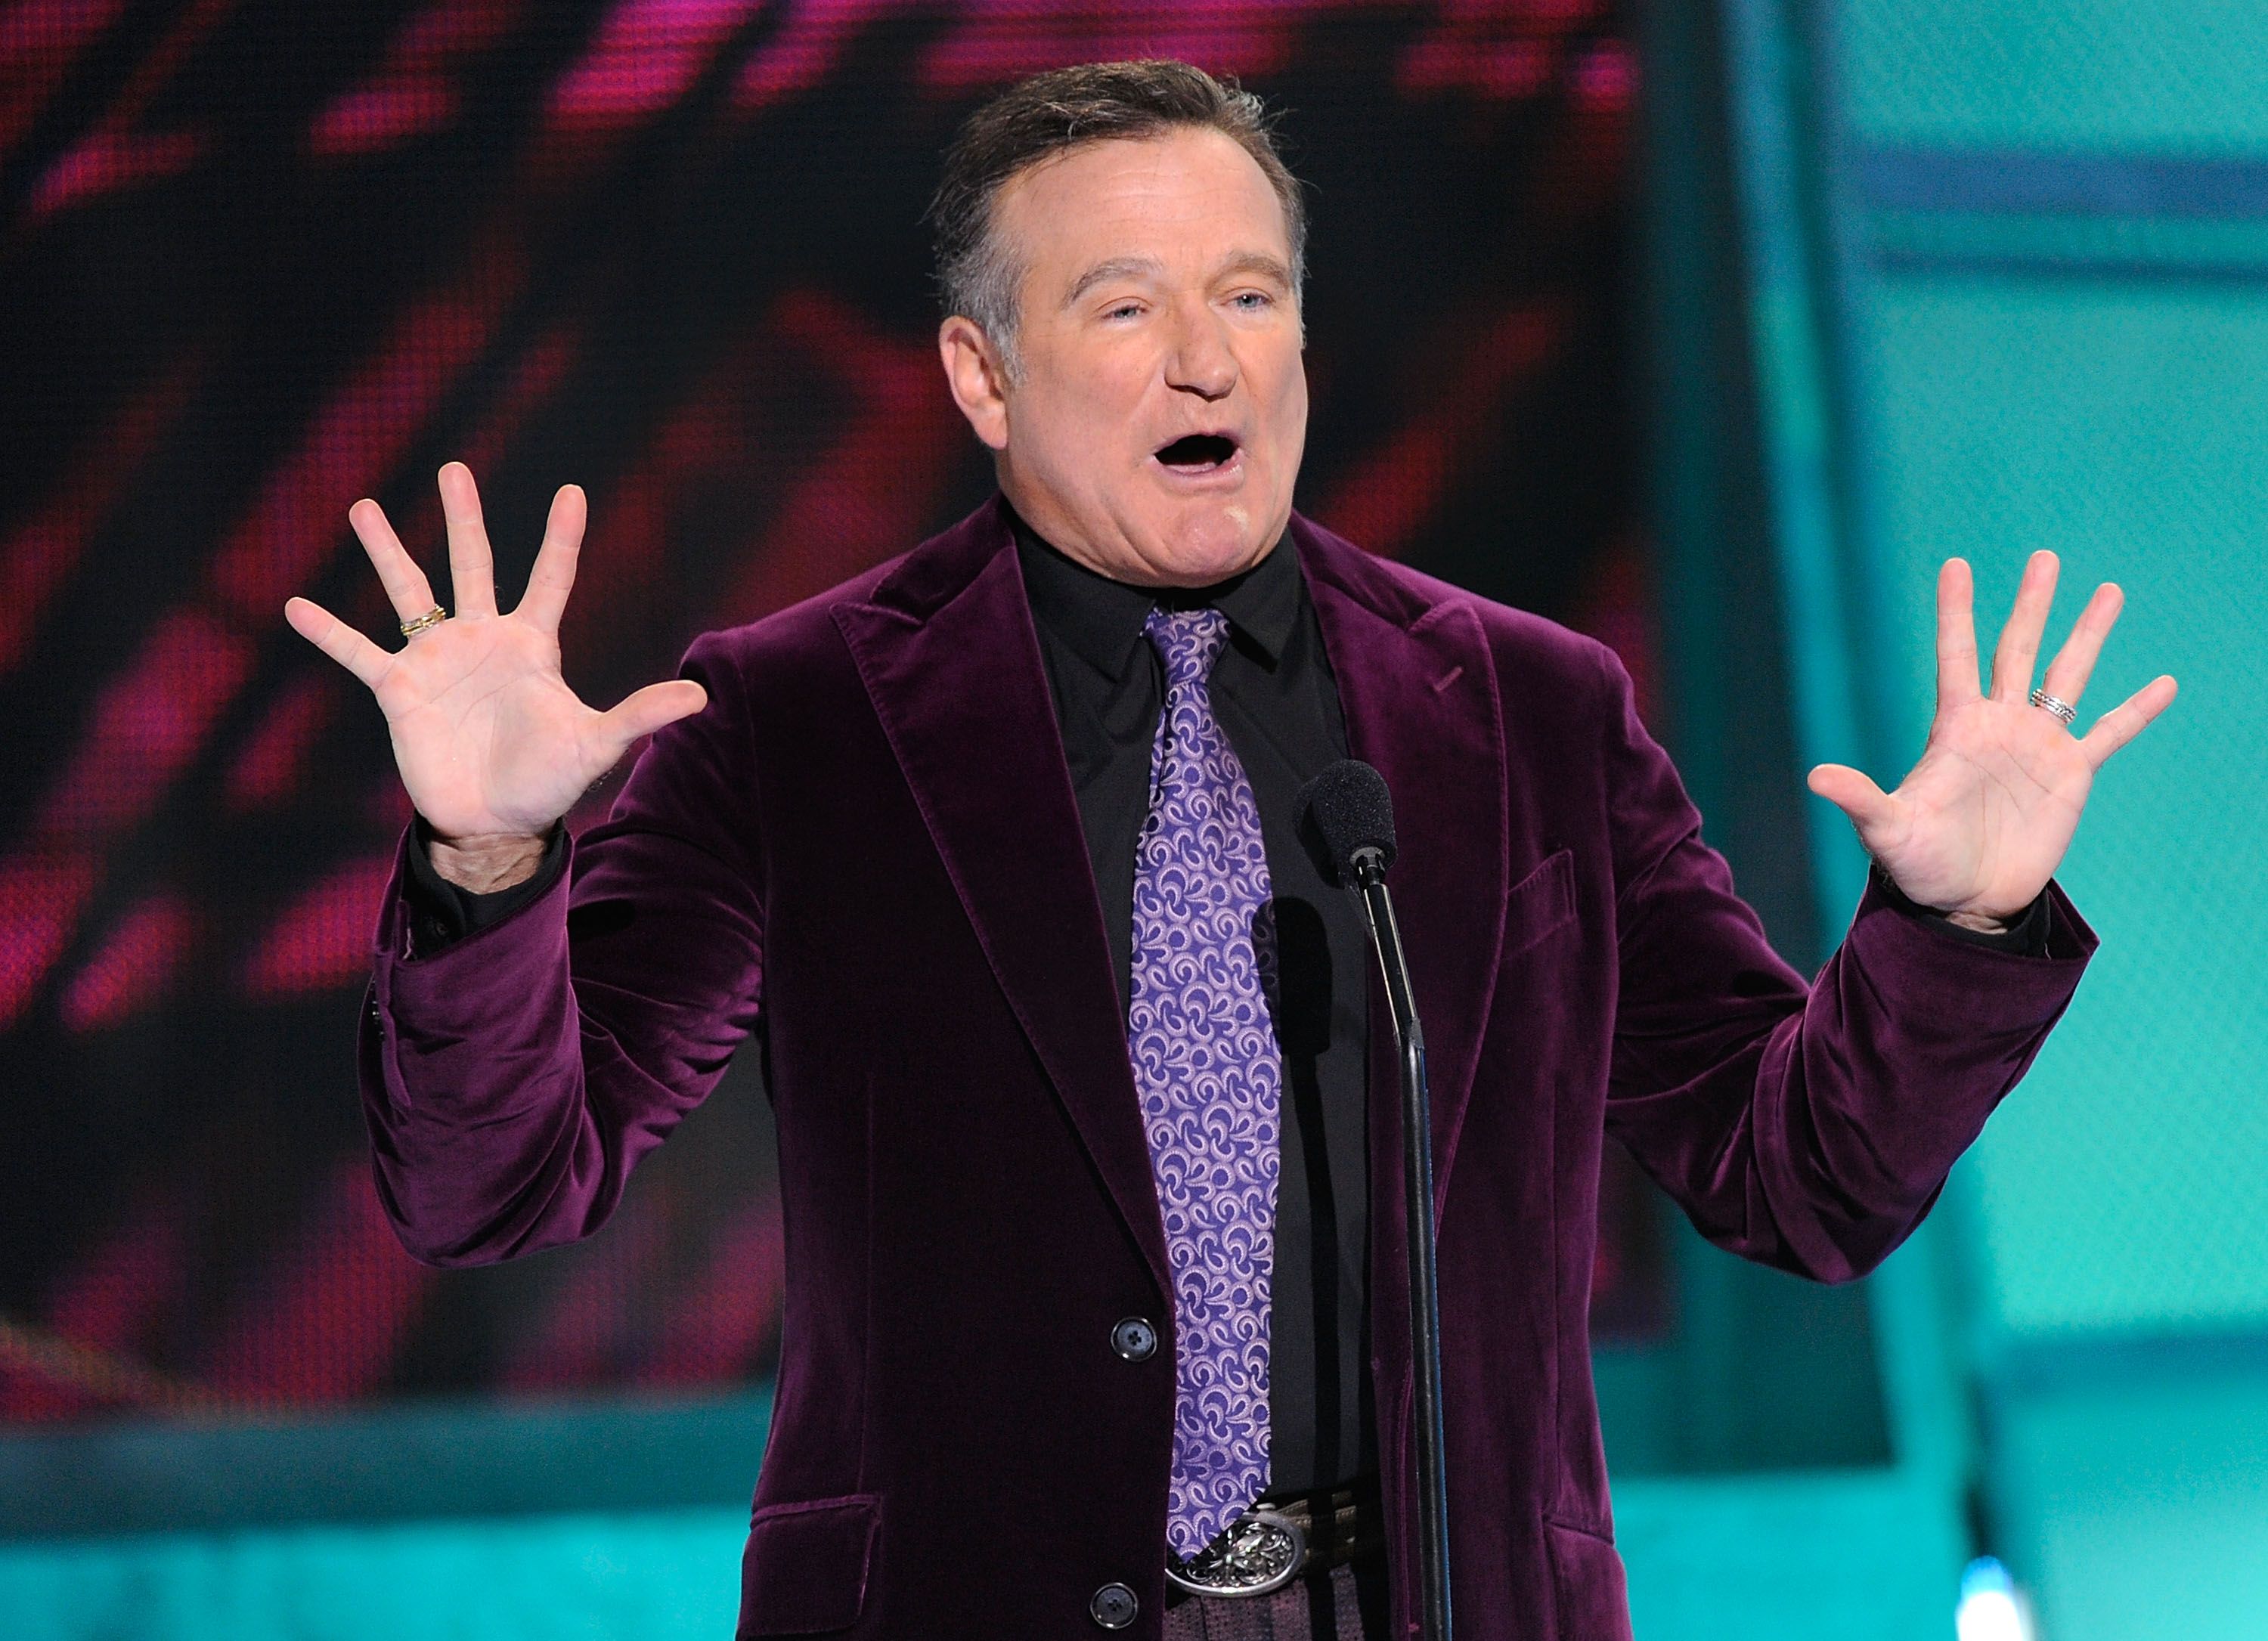 Robin Williams at the Shrine Auditorium on January 7, 2009 | Photo: Getty Images